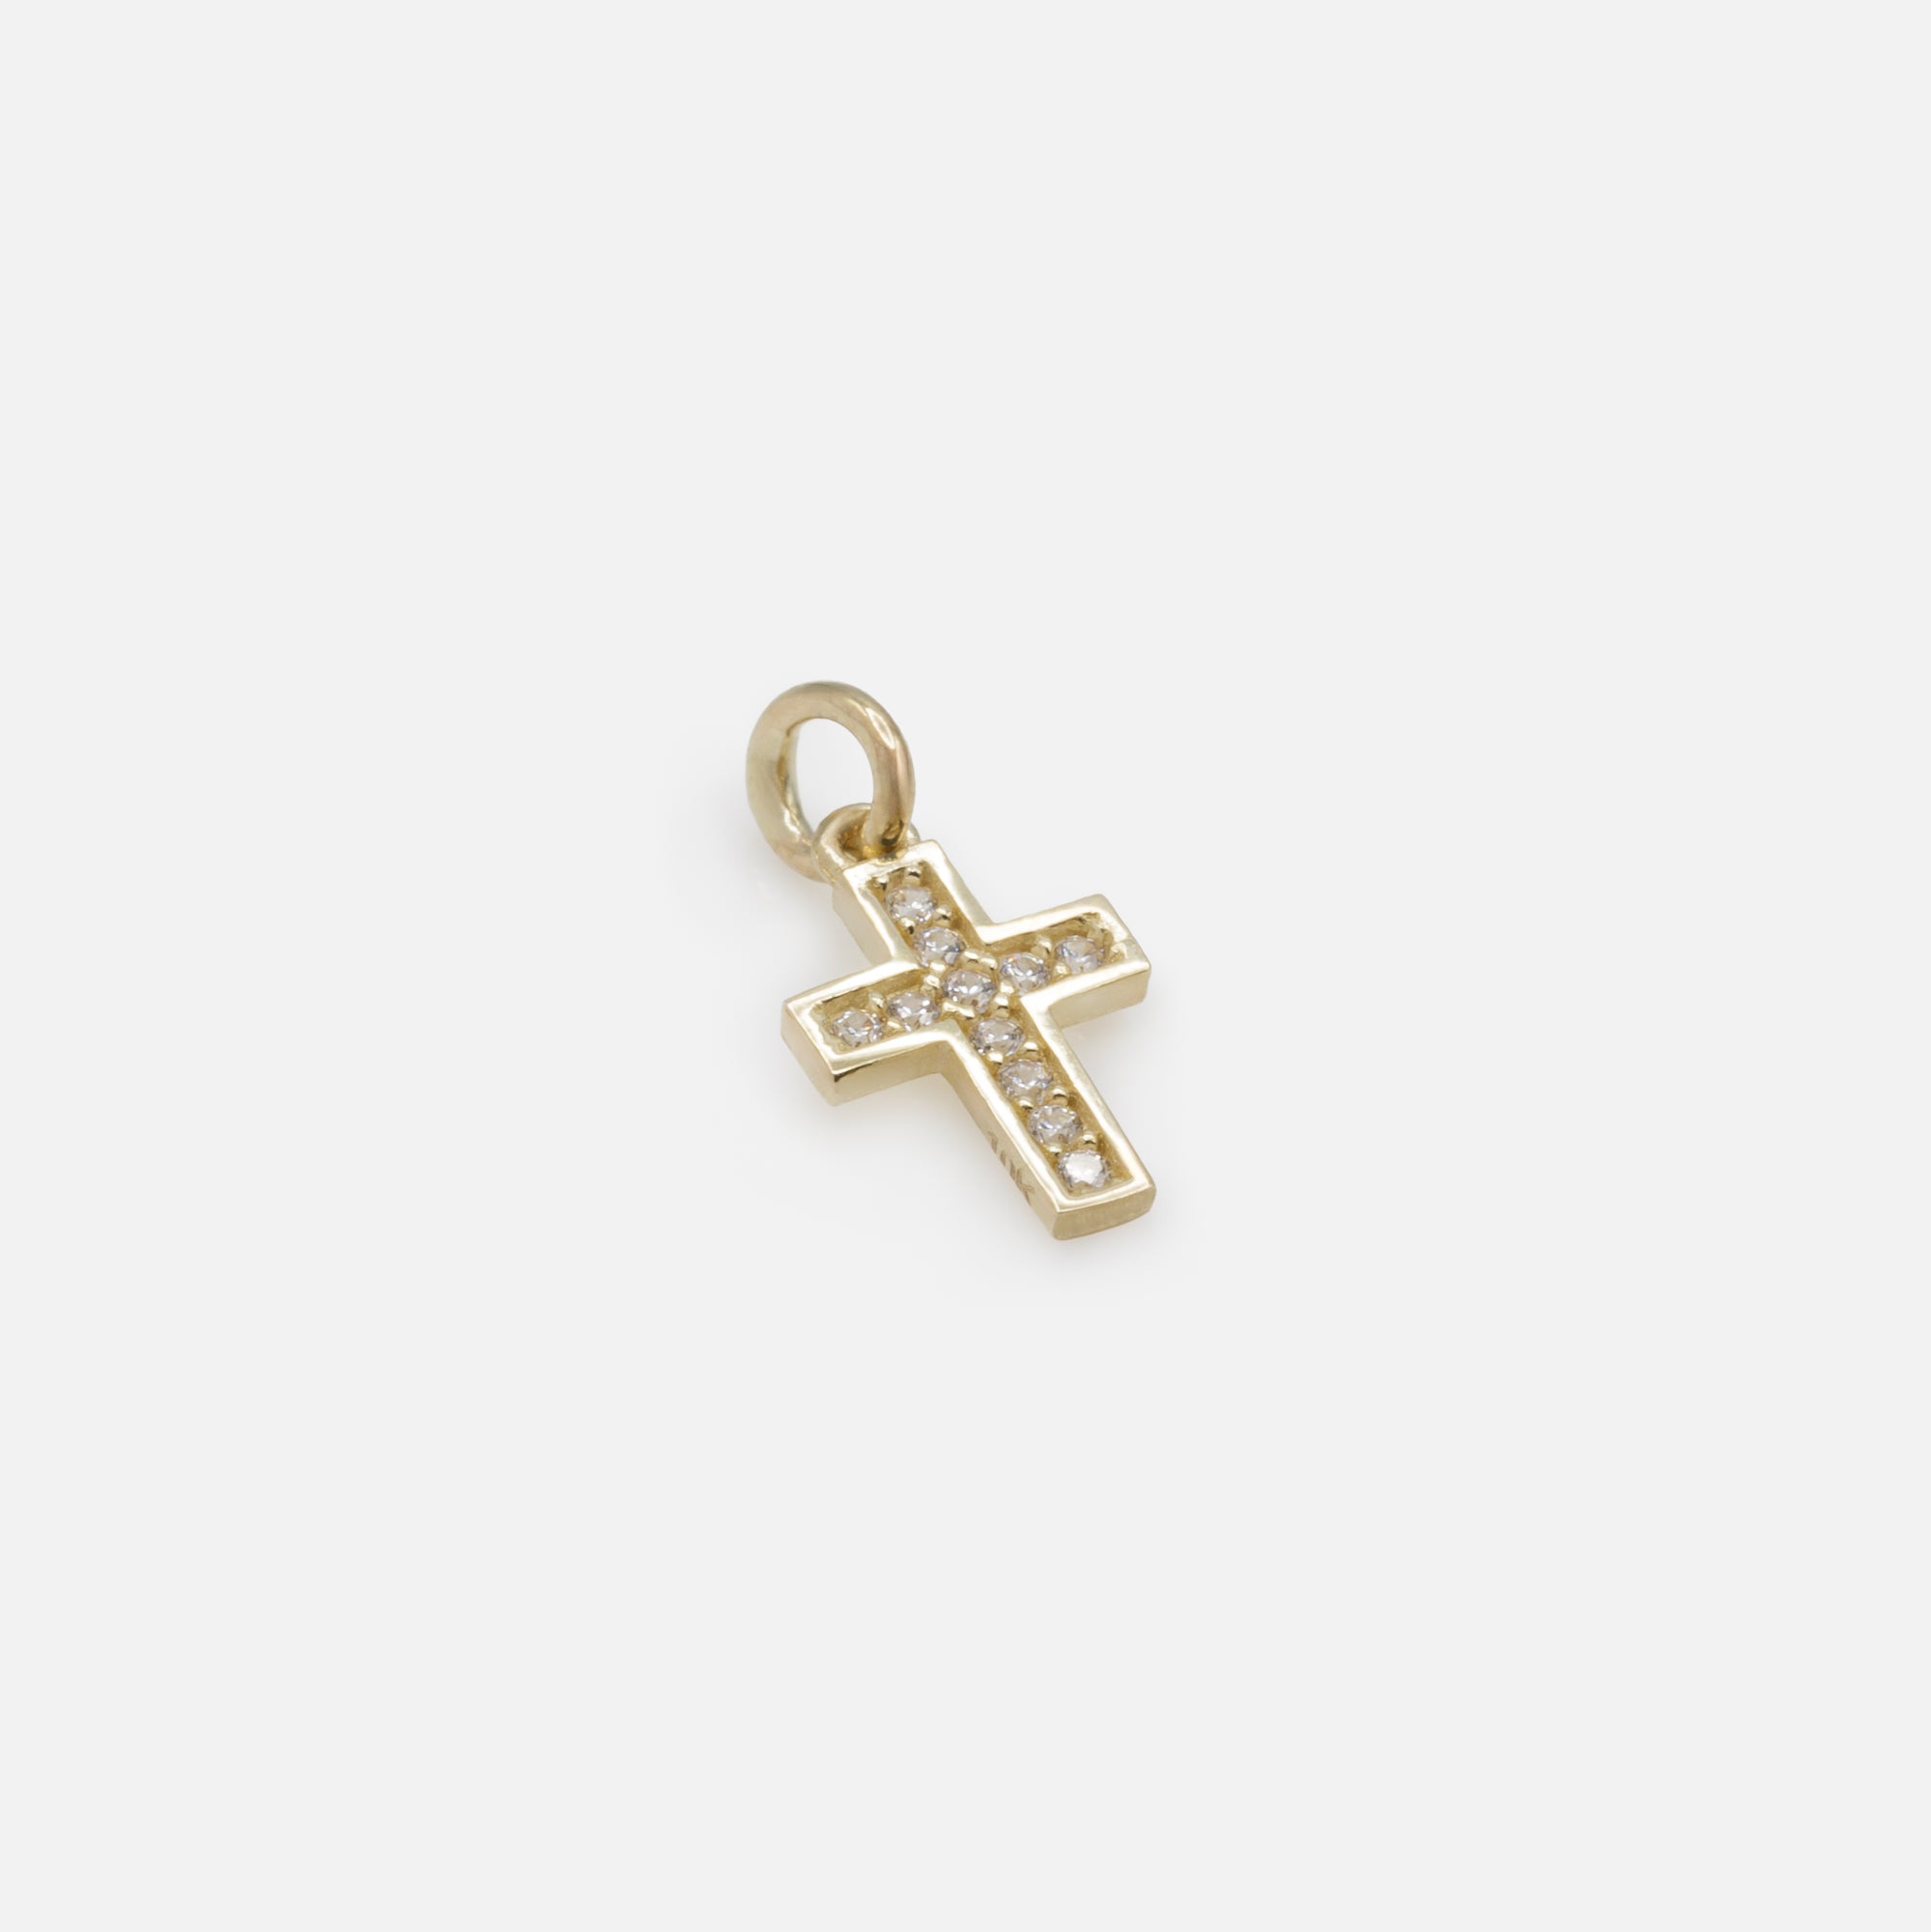 Small cross charm with cubic zirconia interior in 10k gold